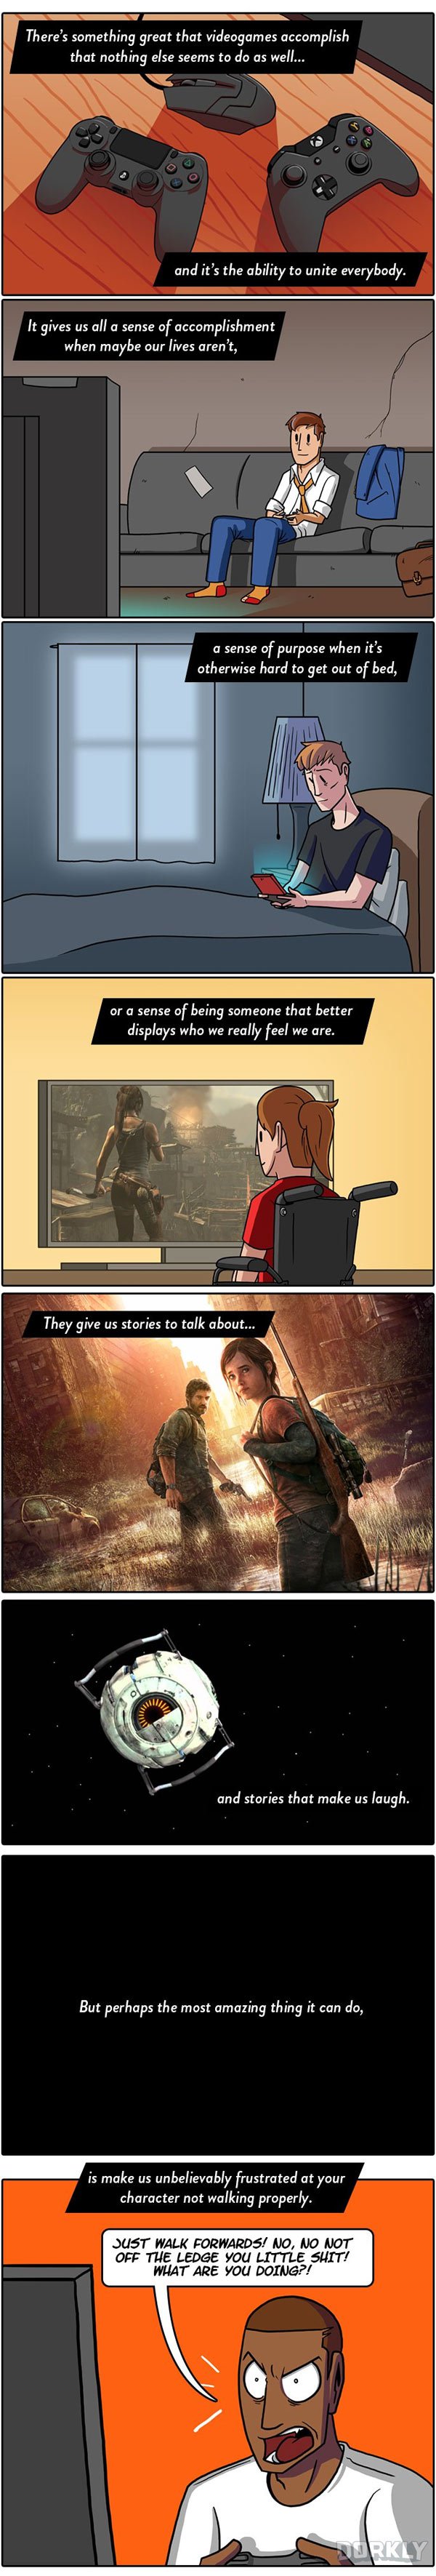 The Best Part About Video Games